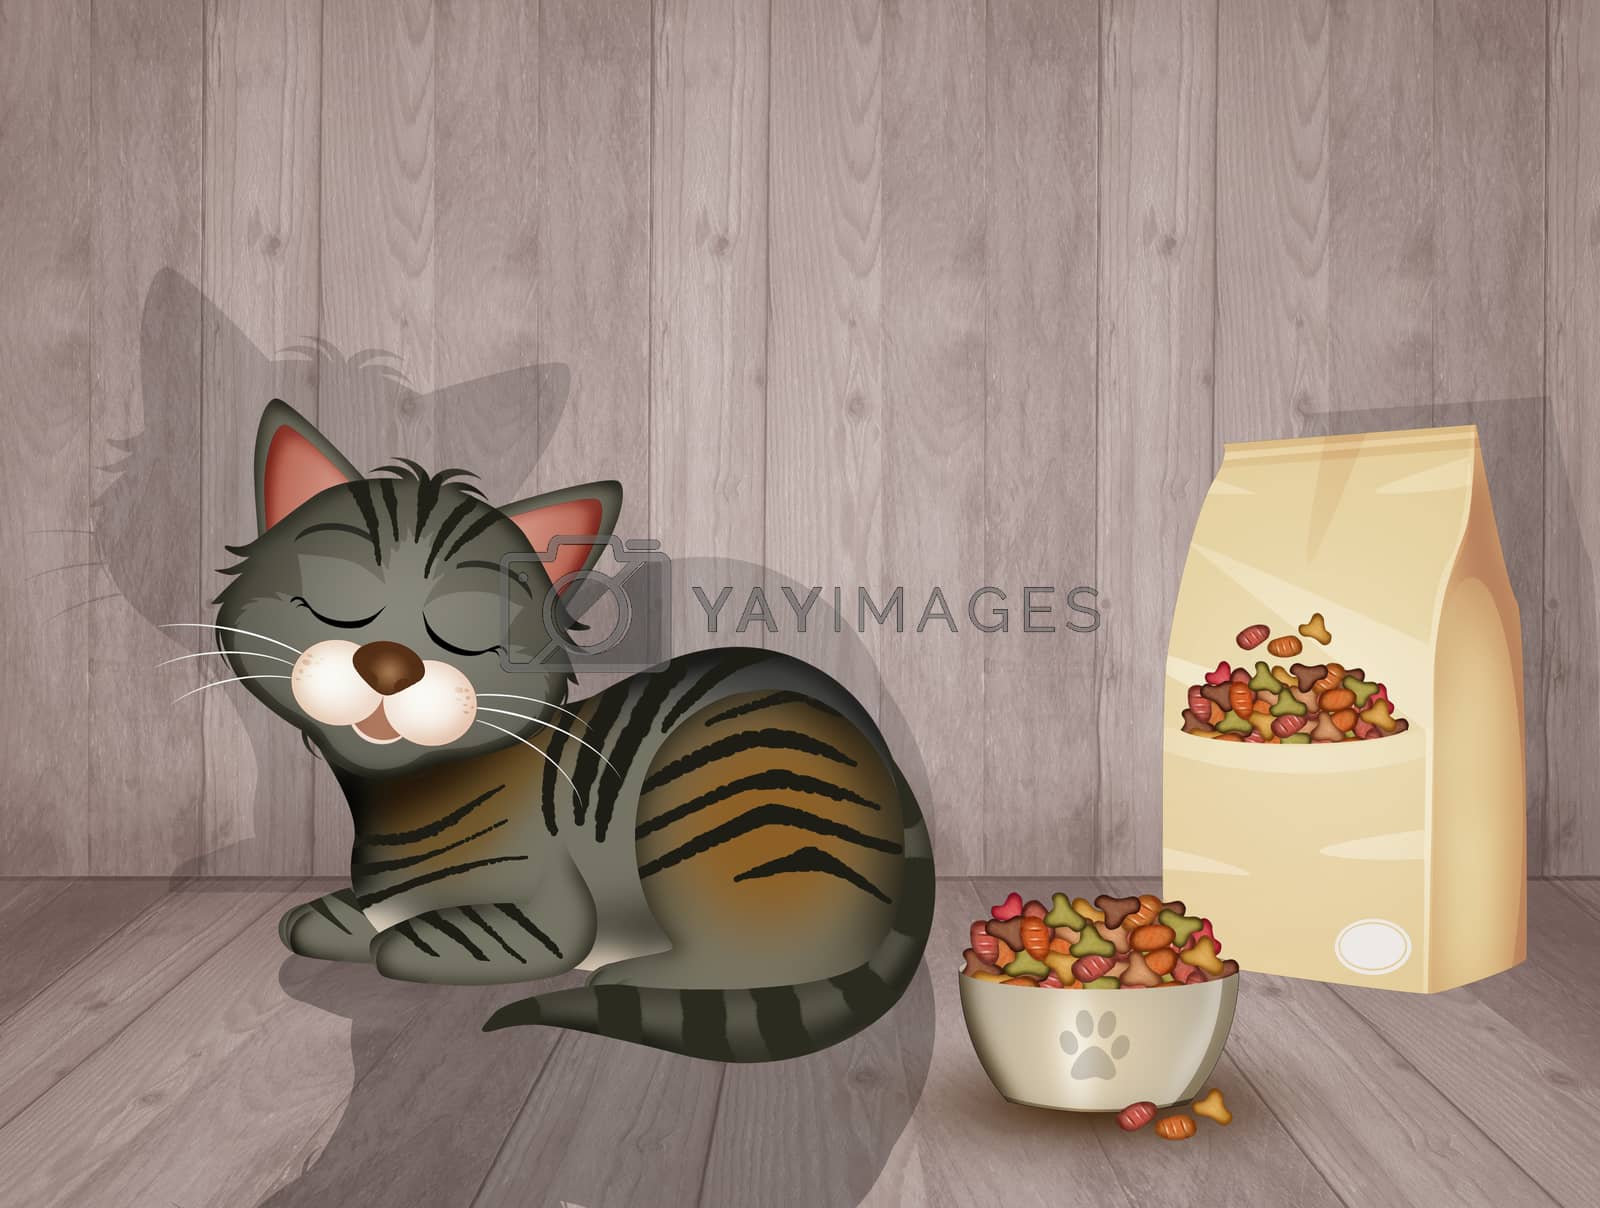 Royalty free image of nutrient rich cat food by adrenalina